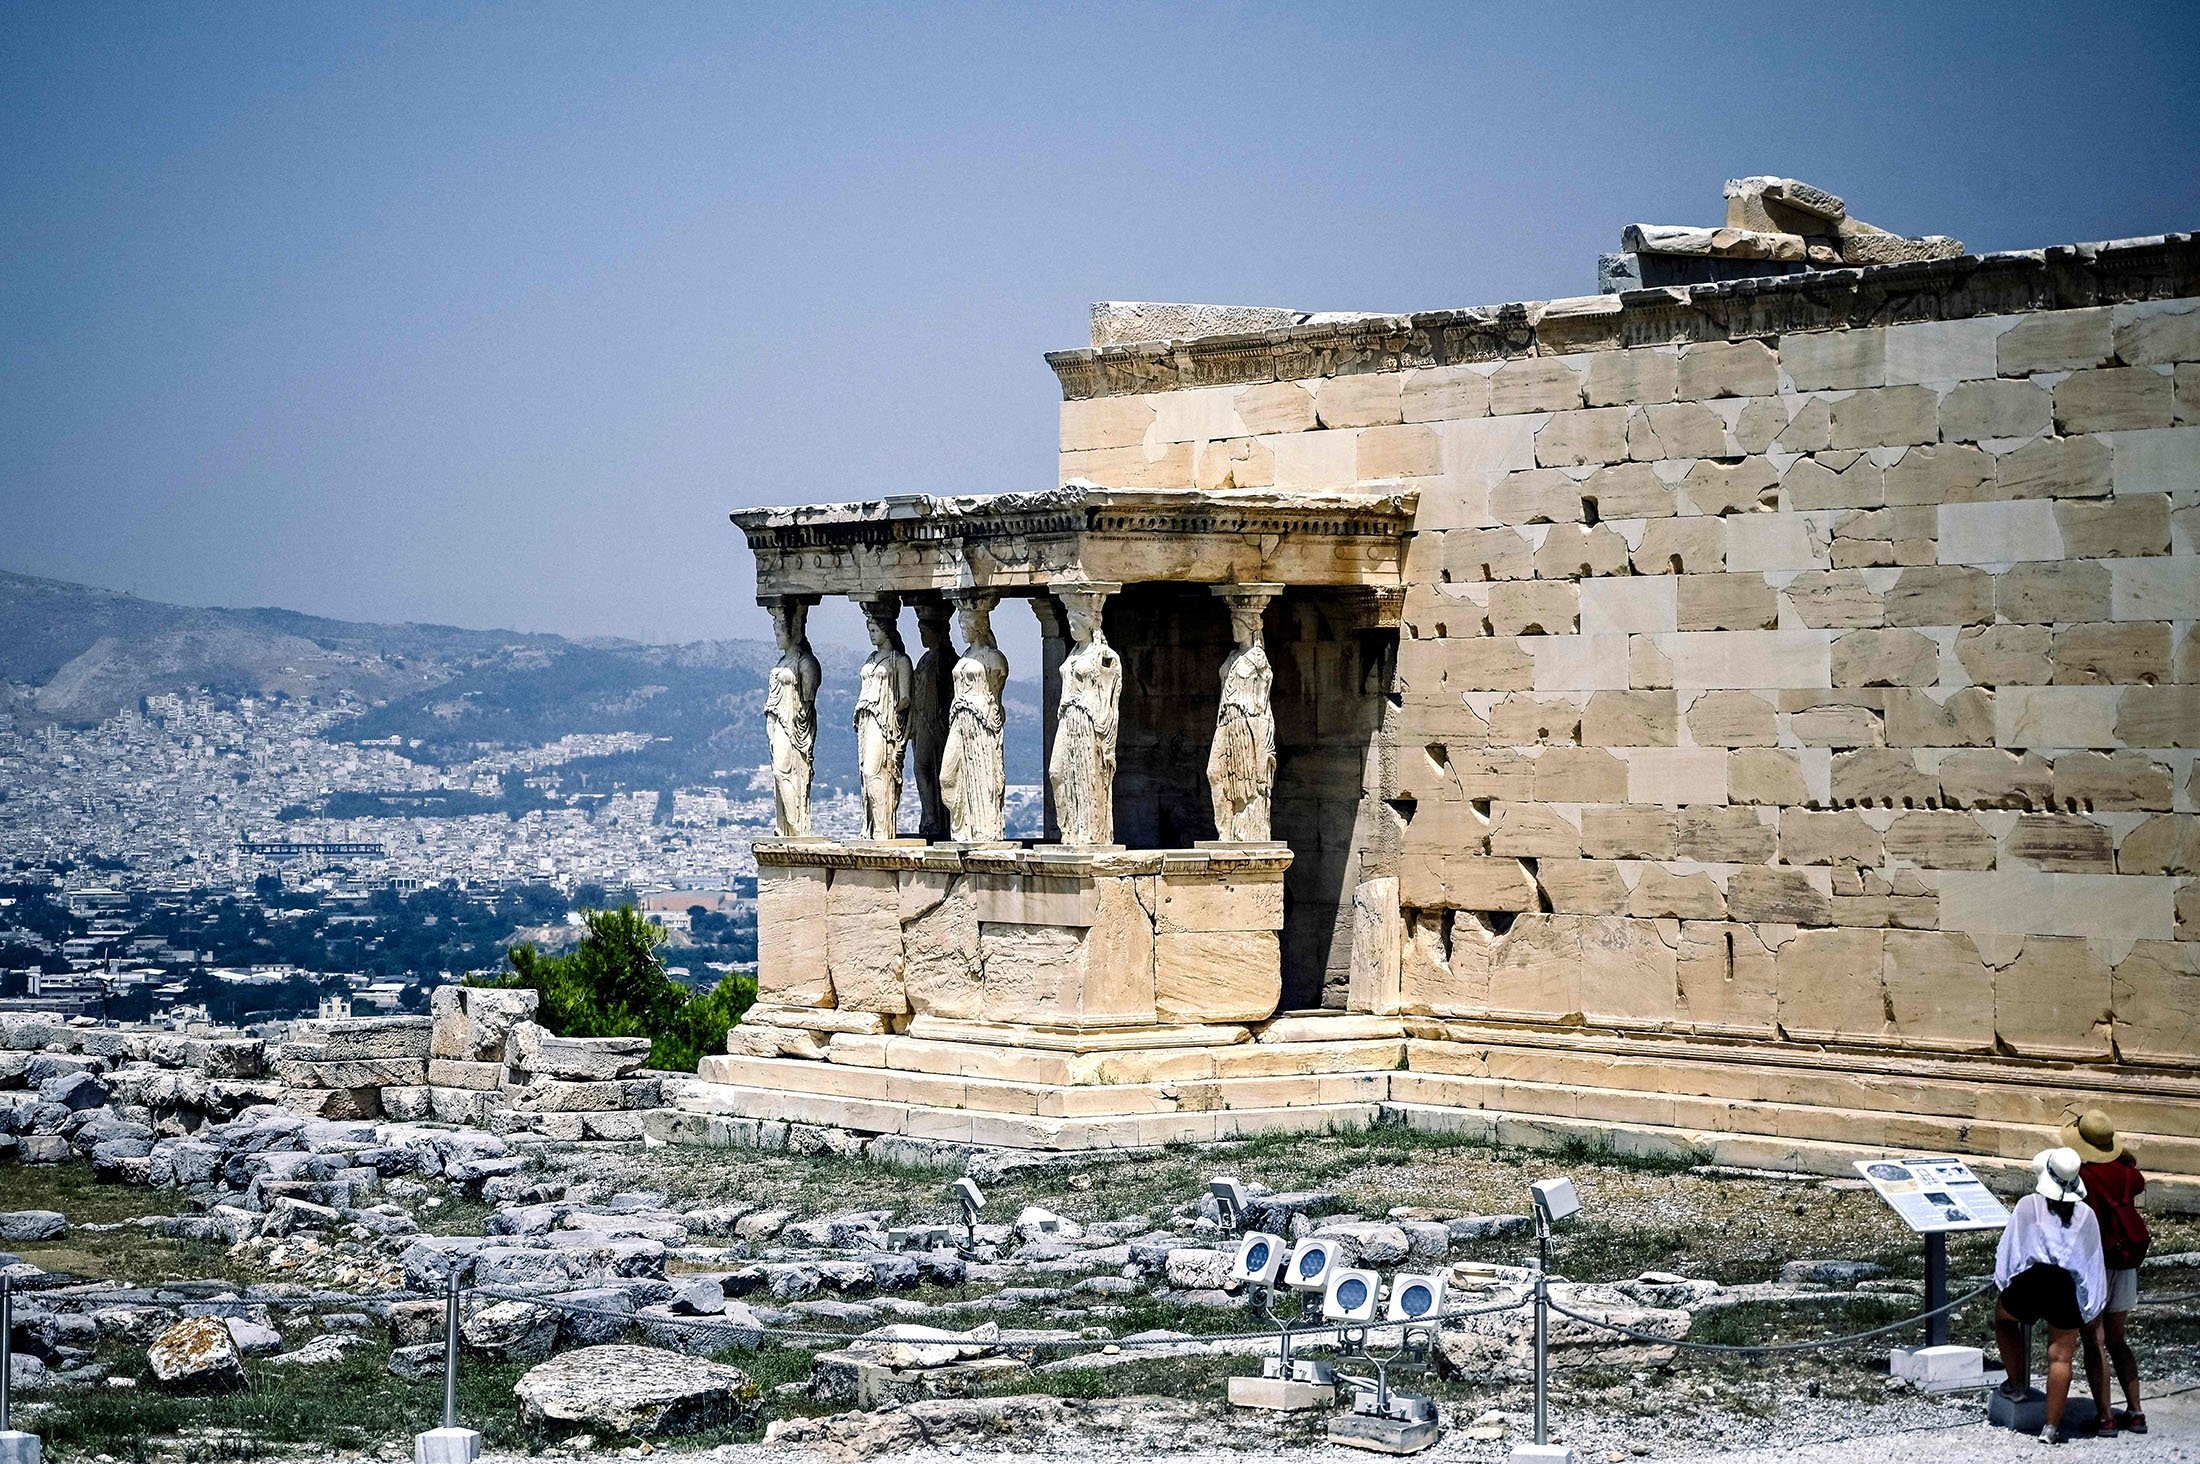 Visitors looks at the Cariatyds of Erechtheion in Athens, Greece, April 6, 2022. (AFP Photo)